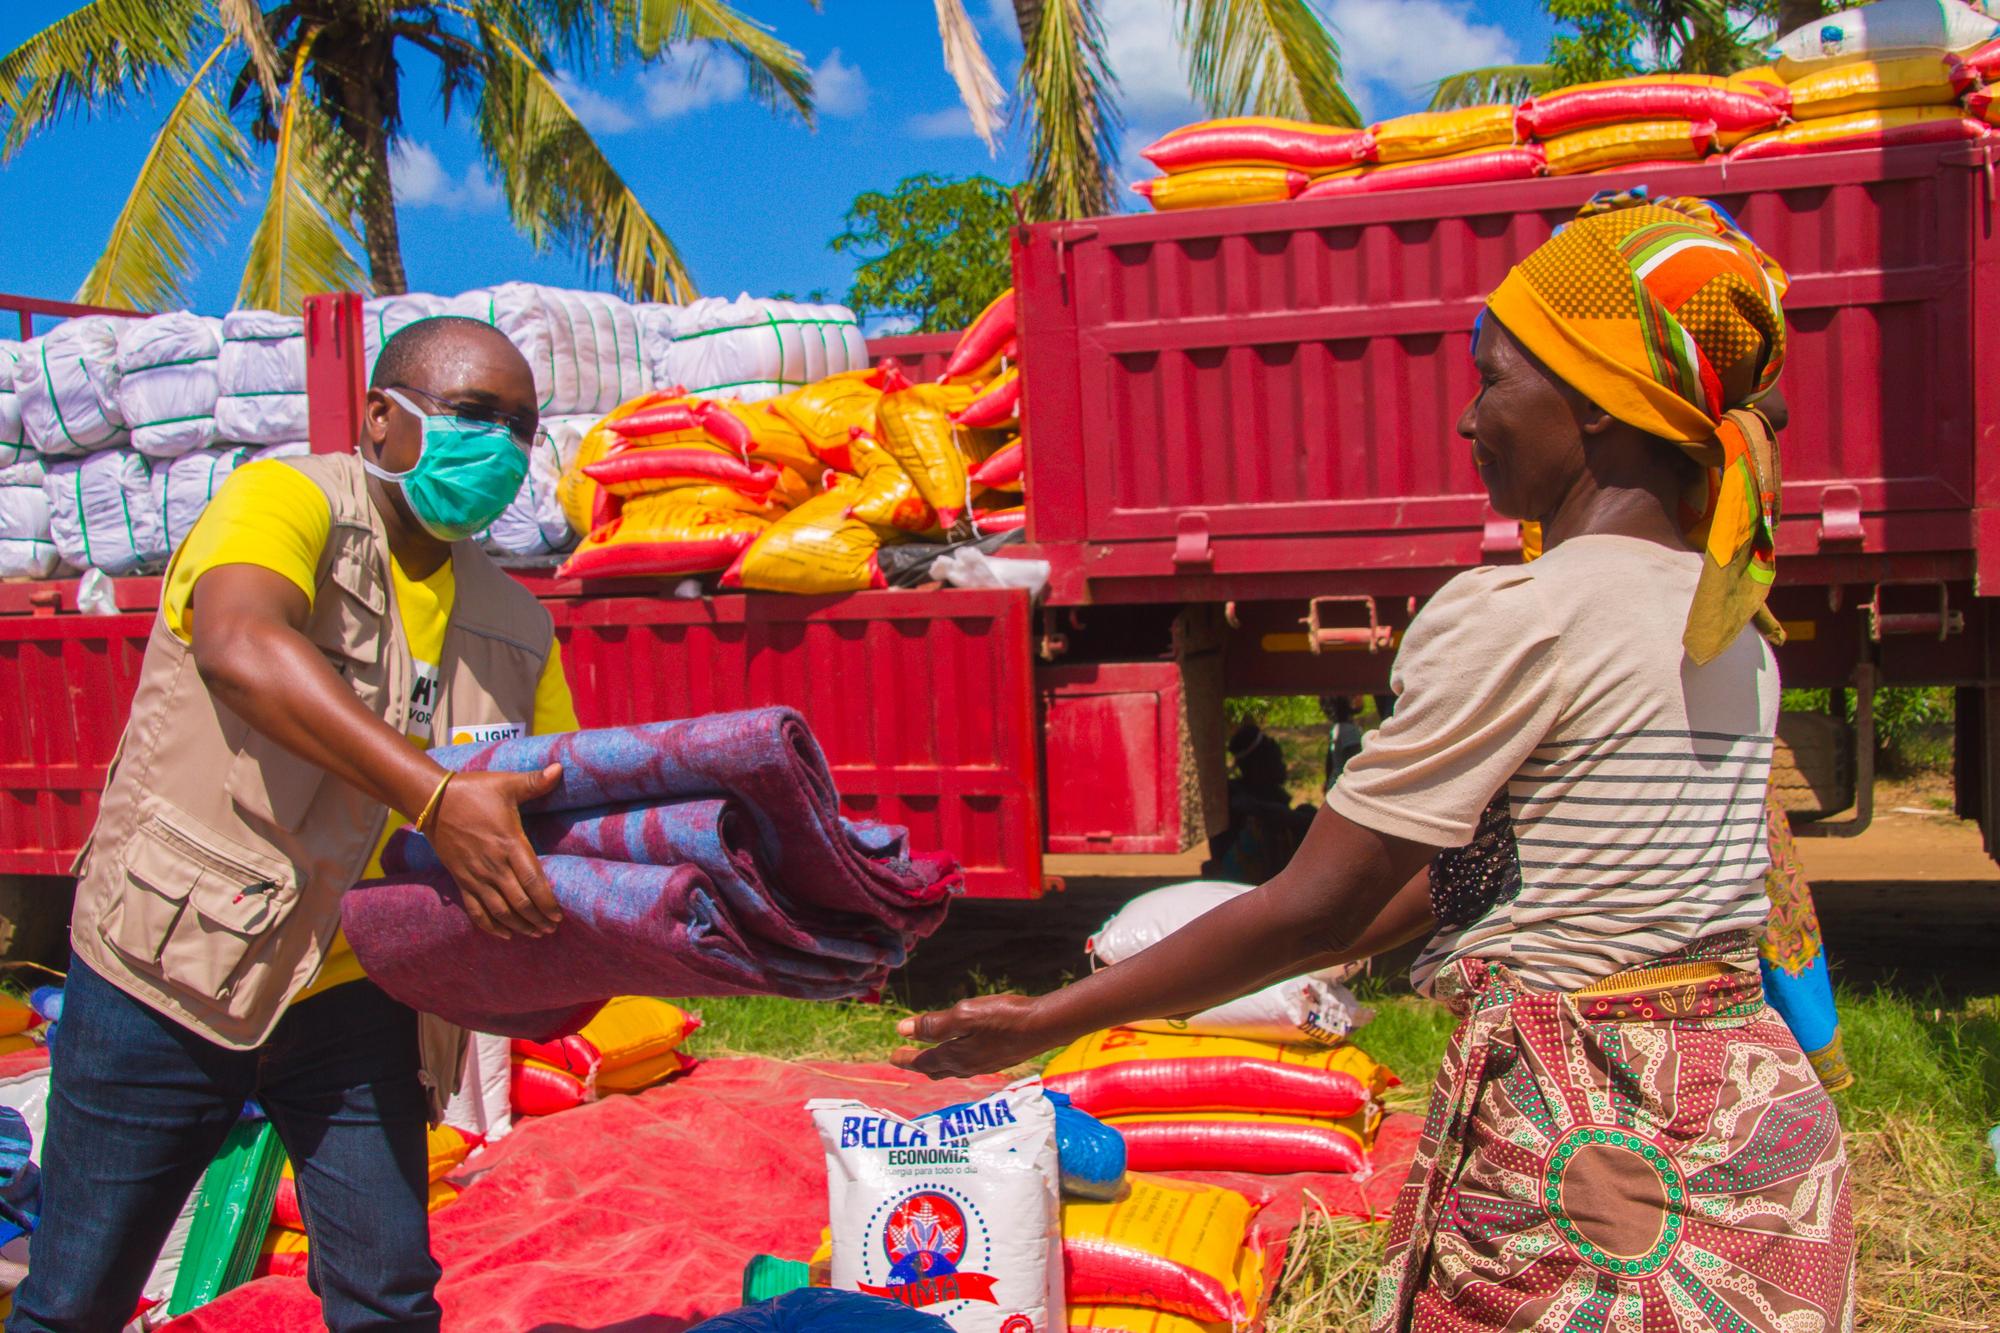 A slideshow image shows an aid worker from Light for the World wearing a yellow T-Shirt and a mask hands blankets to a woman from Mozambique dressed in a beige shirt and a colorful cloth on her head.